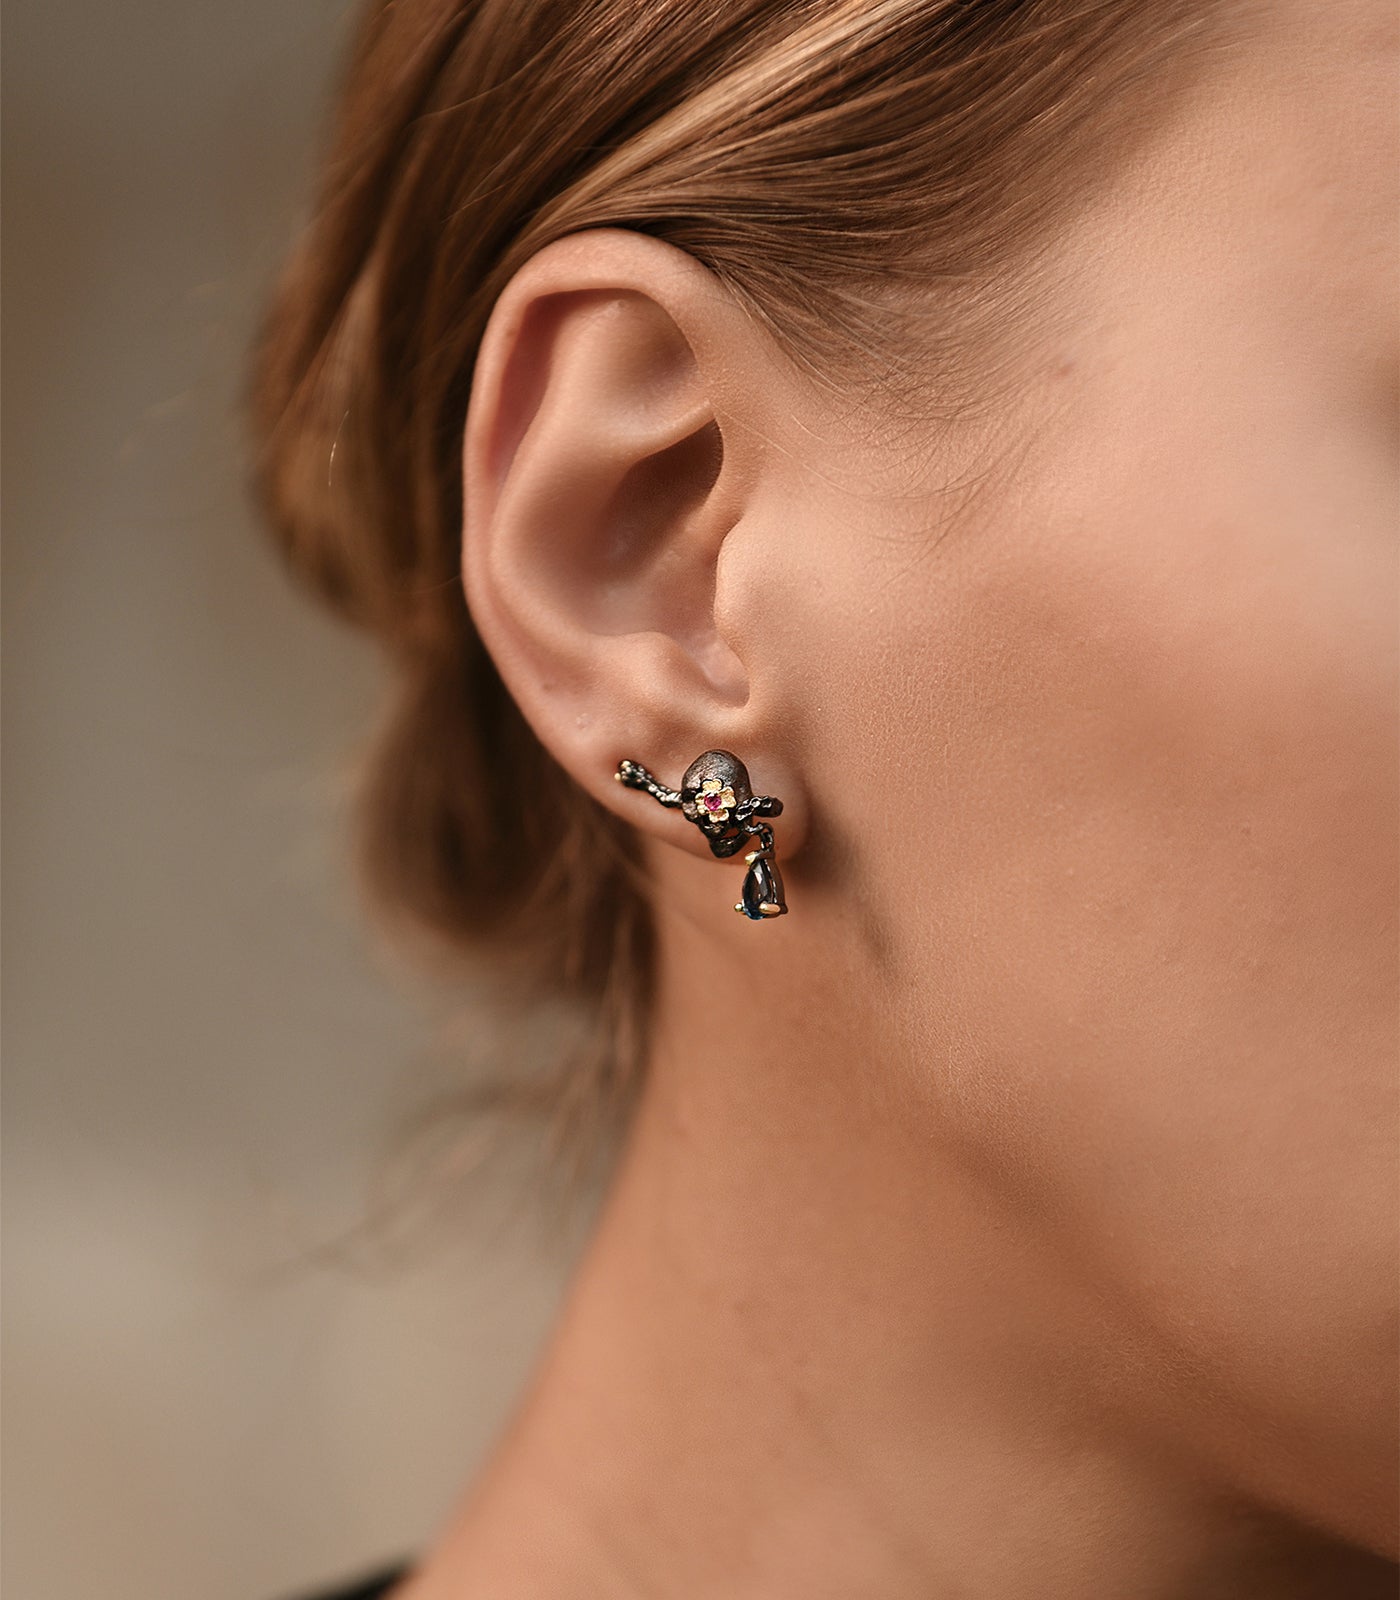 A model wears an oxidised sterling silver skull earring with a gold vermeil flower, pink ruby  and blue topaz gemstones.